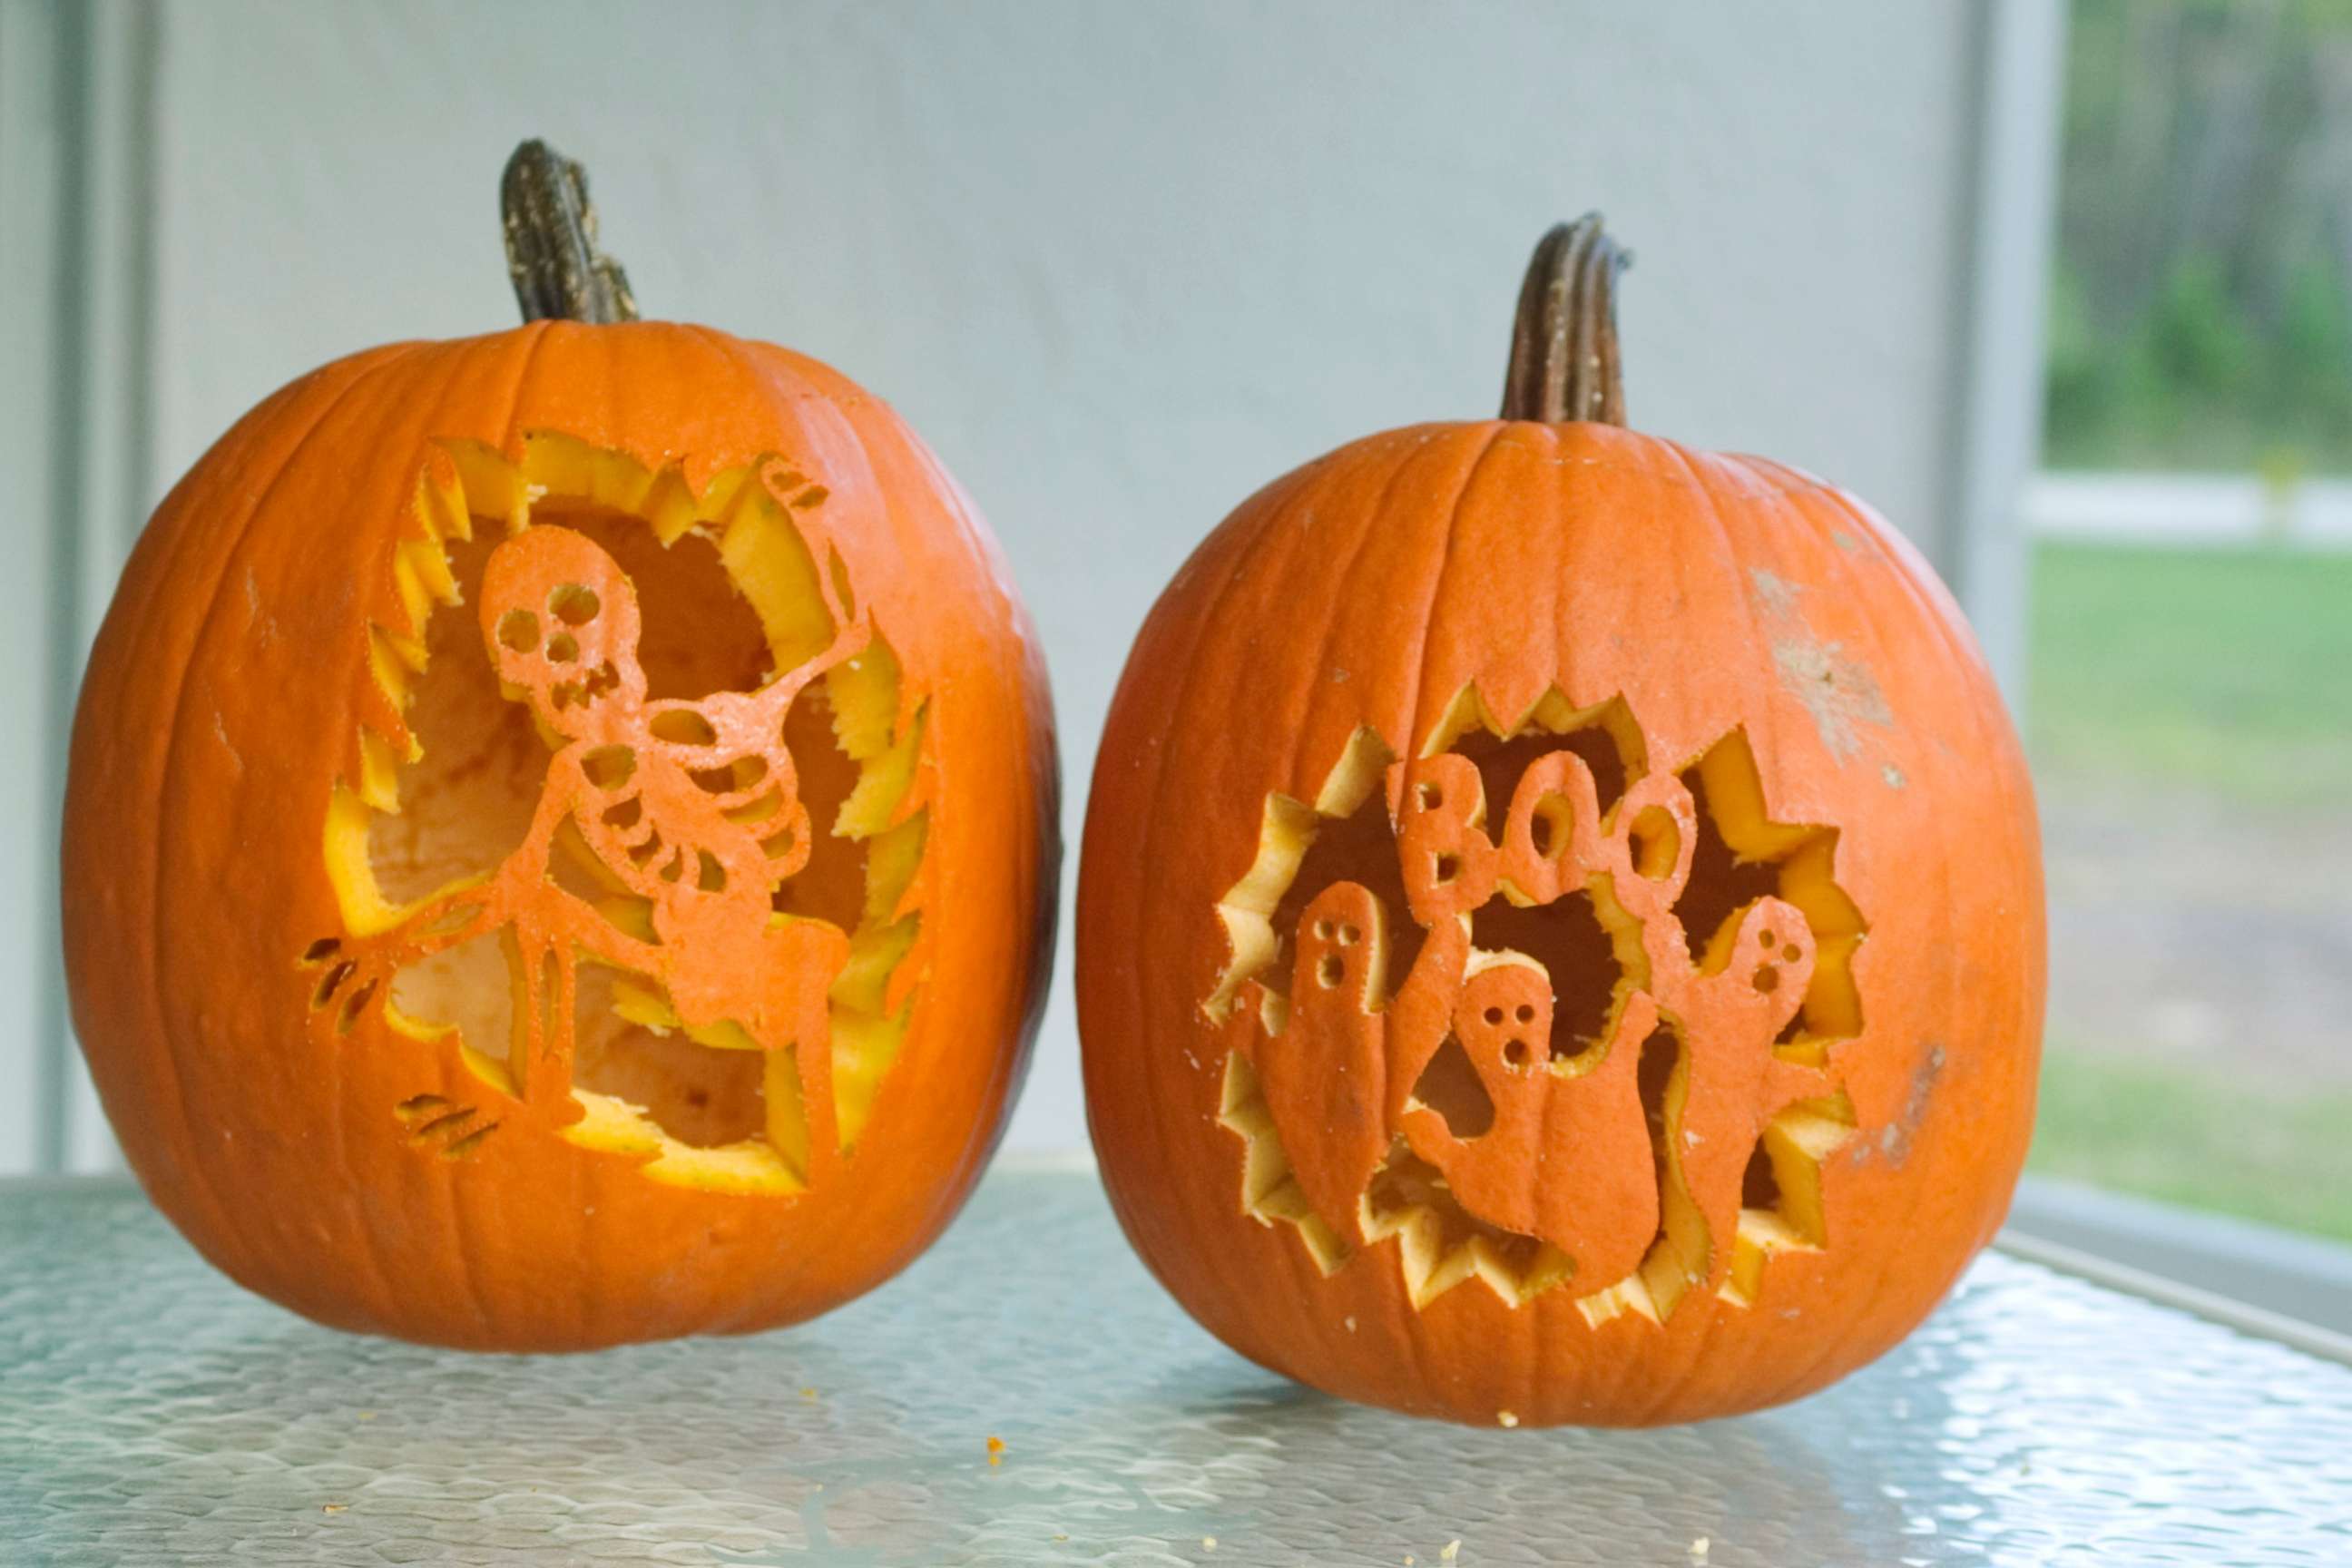 PHOTO: Jack-O-Lanterns with ghosts and skeletons are carved in pumpkins for Halloween in this undated photo.